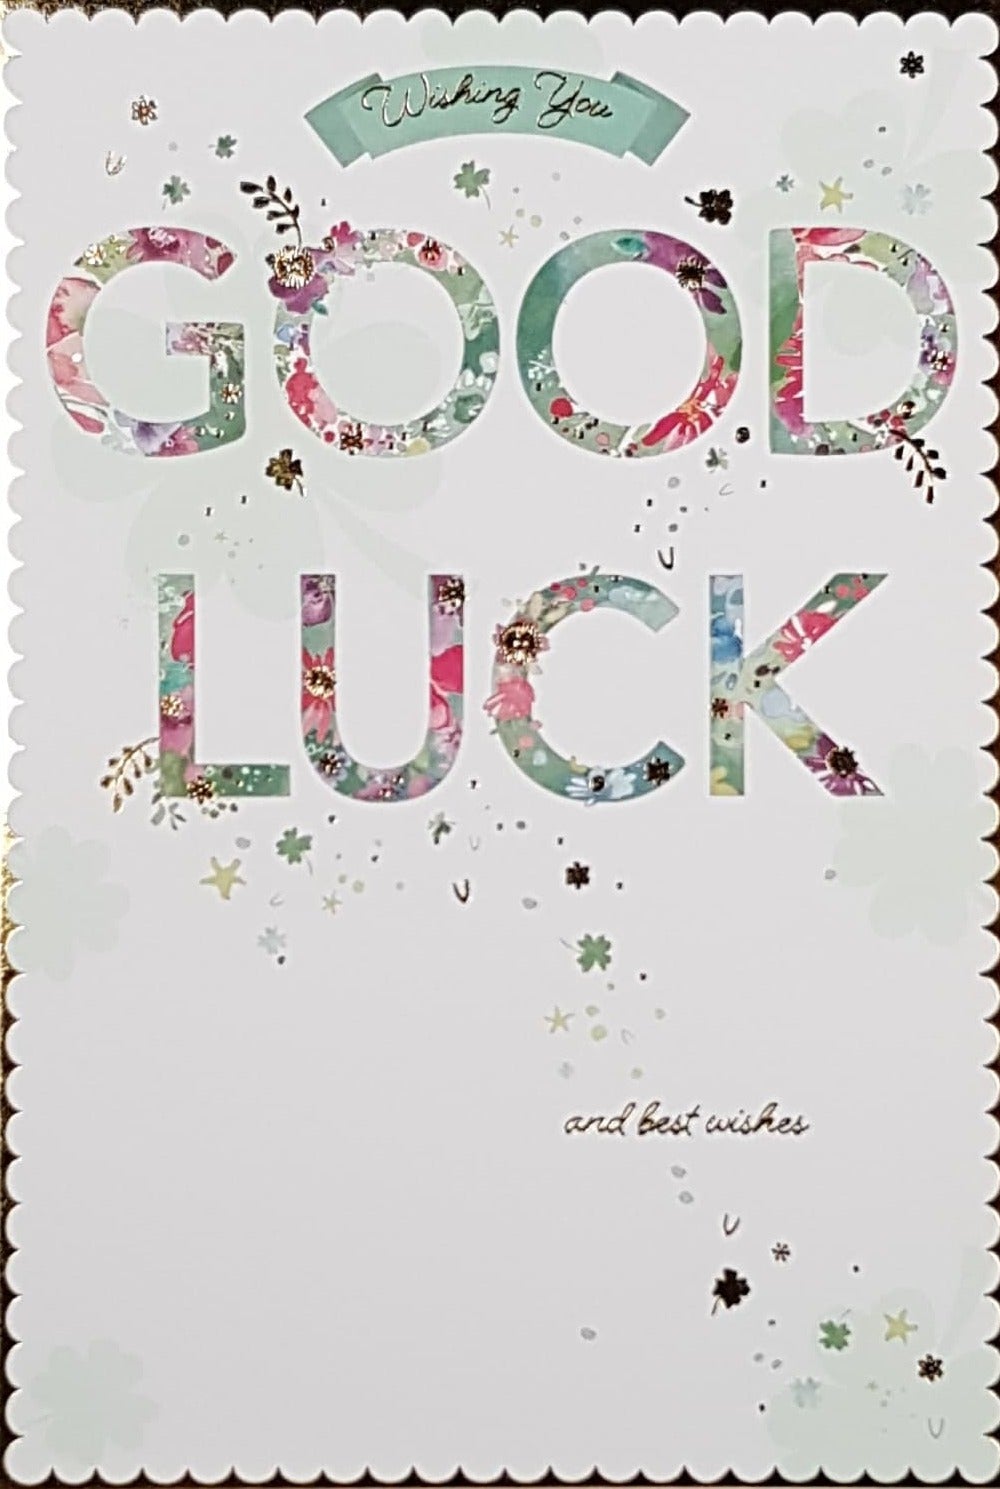 Good Luck Card - A Colourful Floral Font